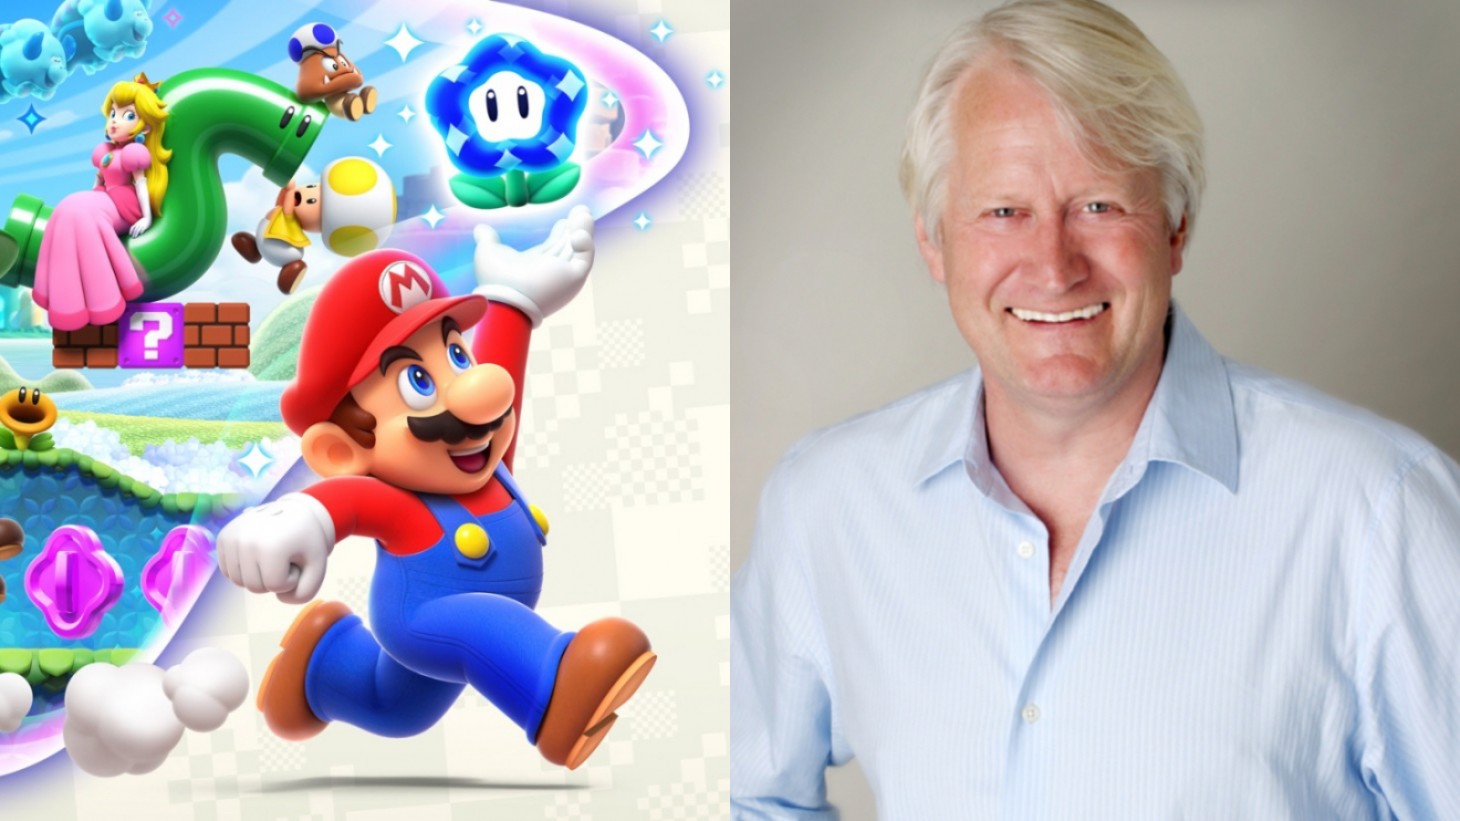 Charles Martinet will no longer voice Super Mario as previously reported by US Mag.